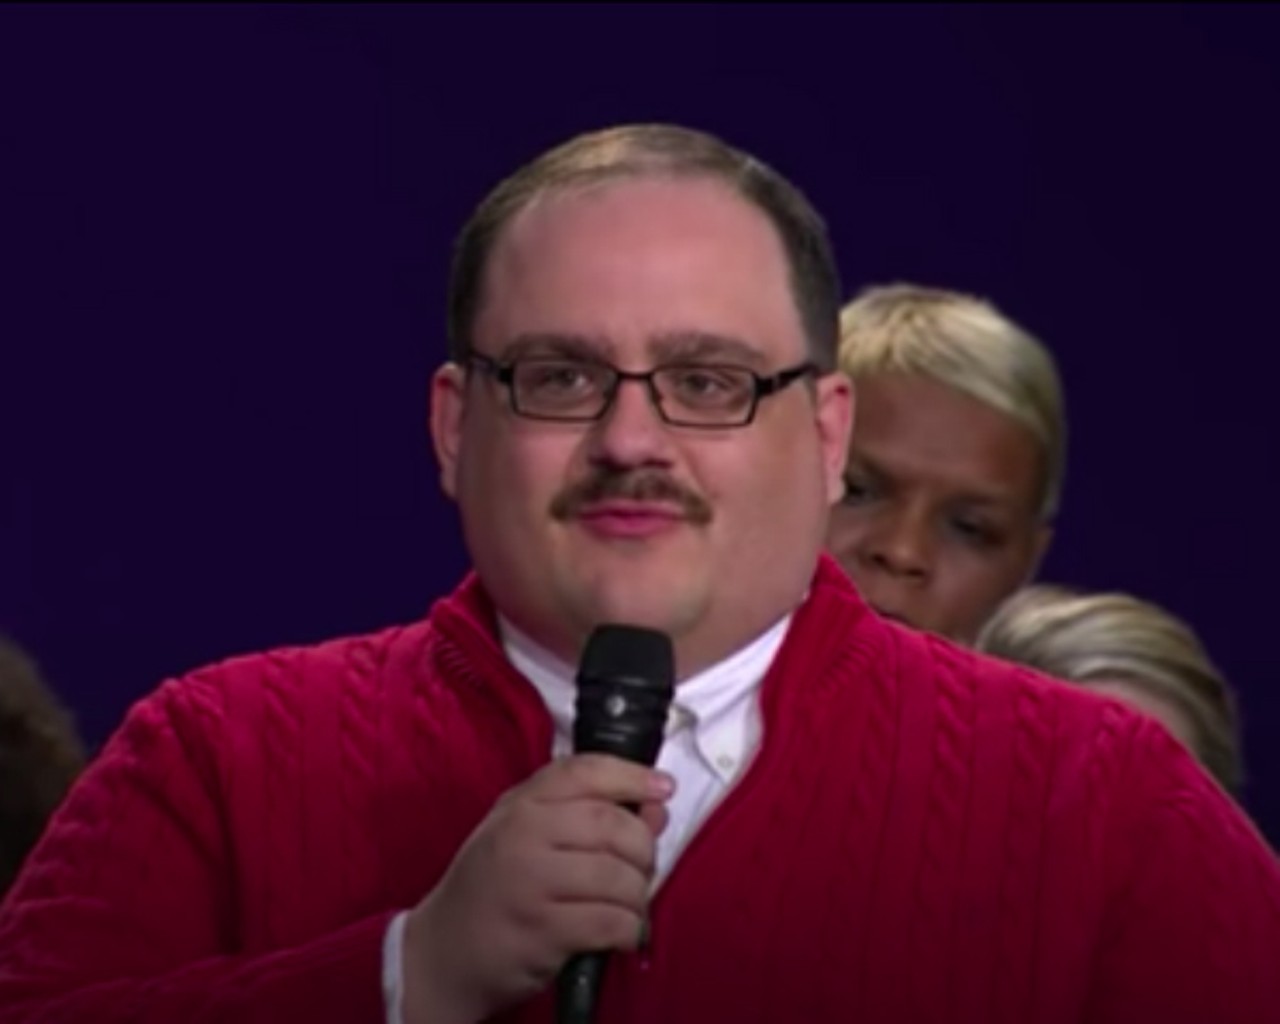 Ken Bone
The undecided Shiloh, Illinois, voter with the red sweater
Photo credit: screengrab from YouTube